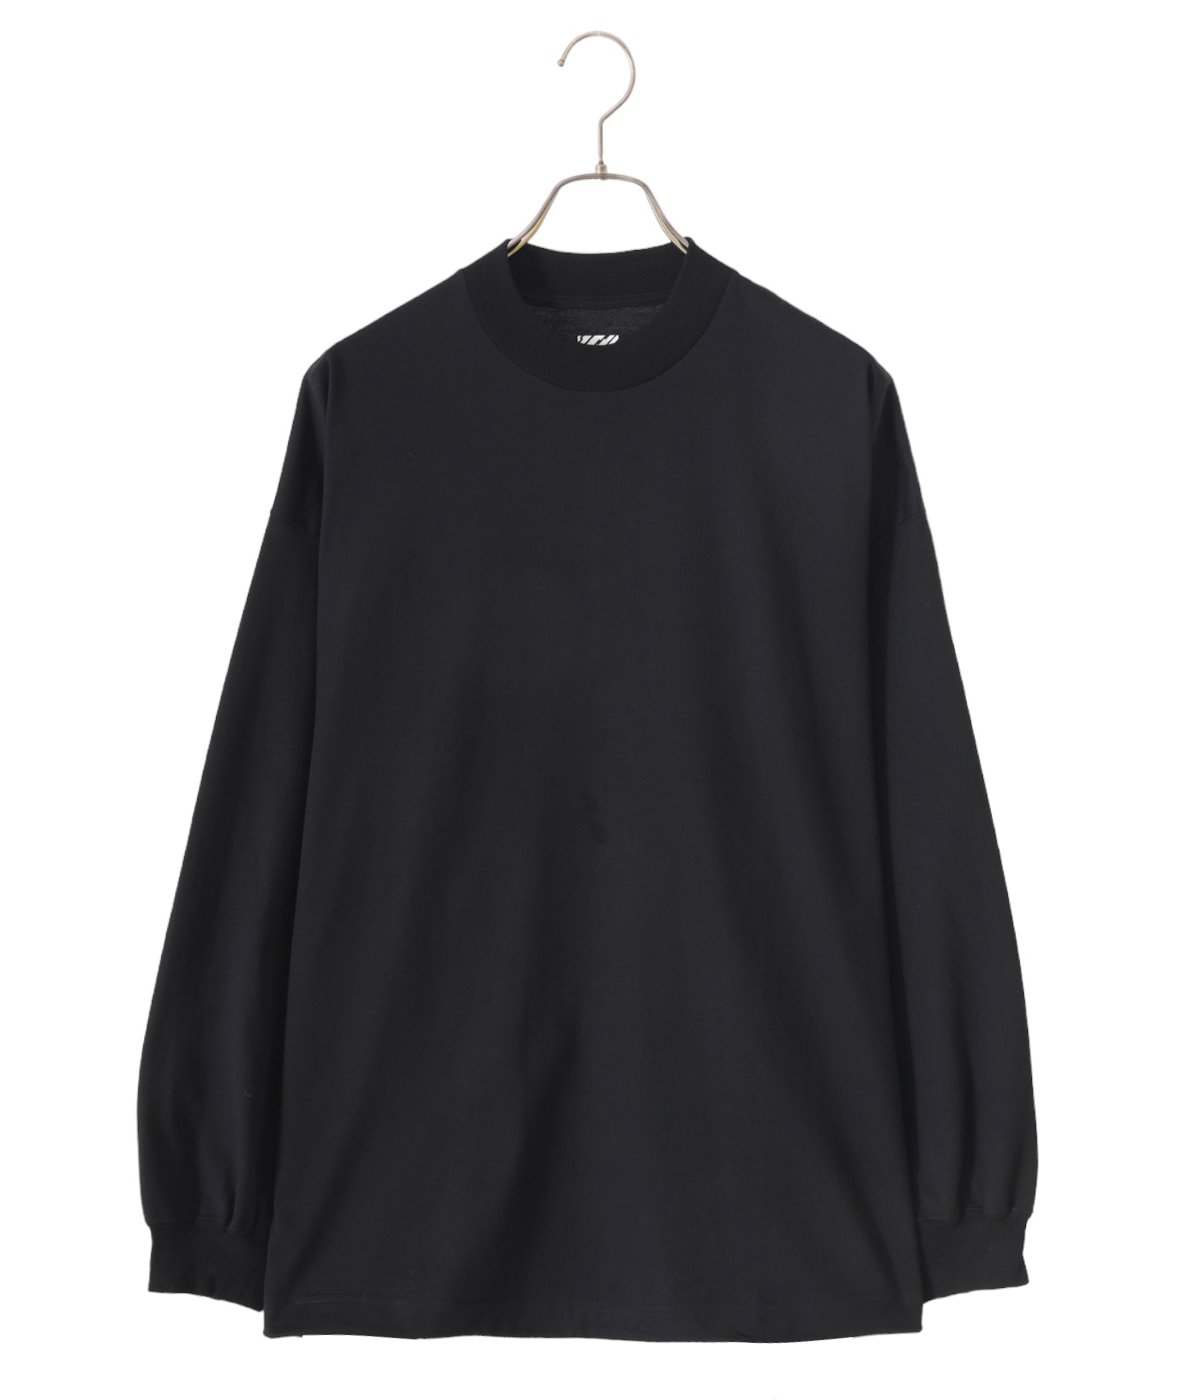 BALLOON LONG T SHIRT | is-ness(イズネス) / トップス カットソー長袖 ...